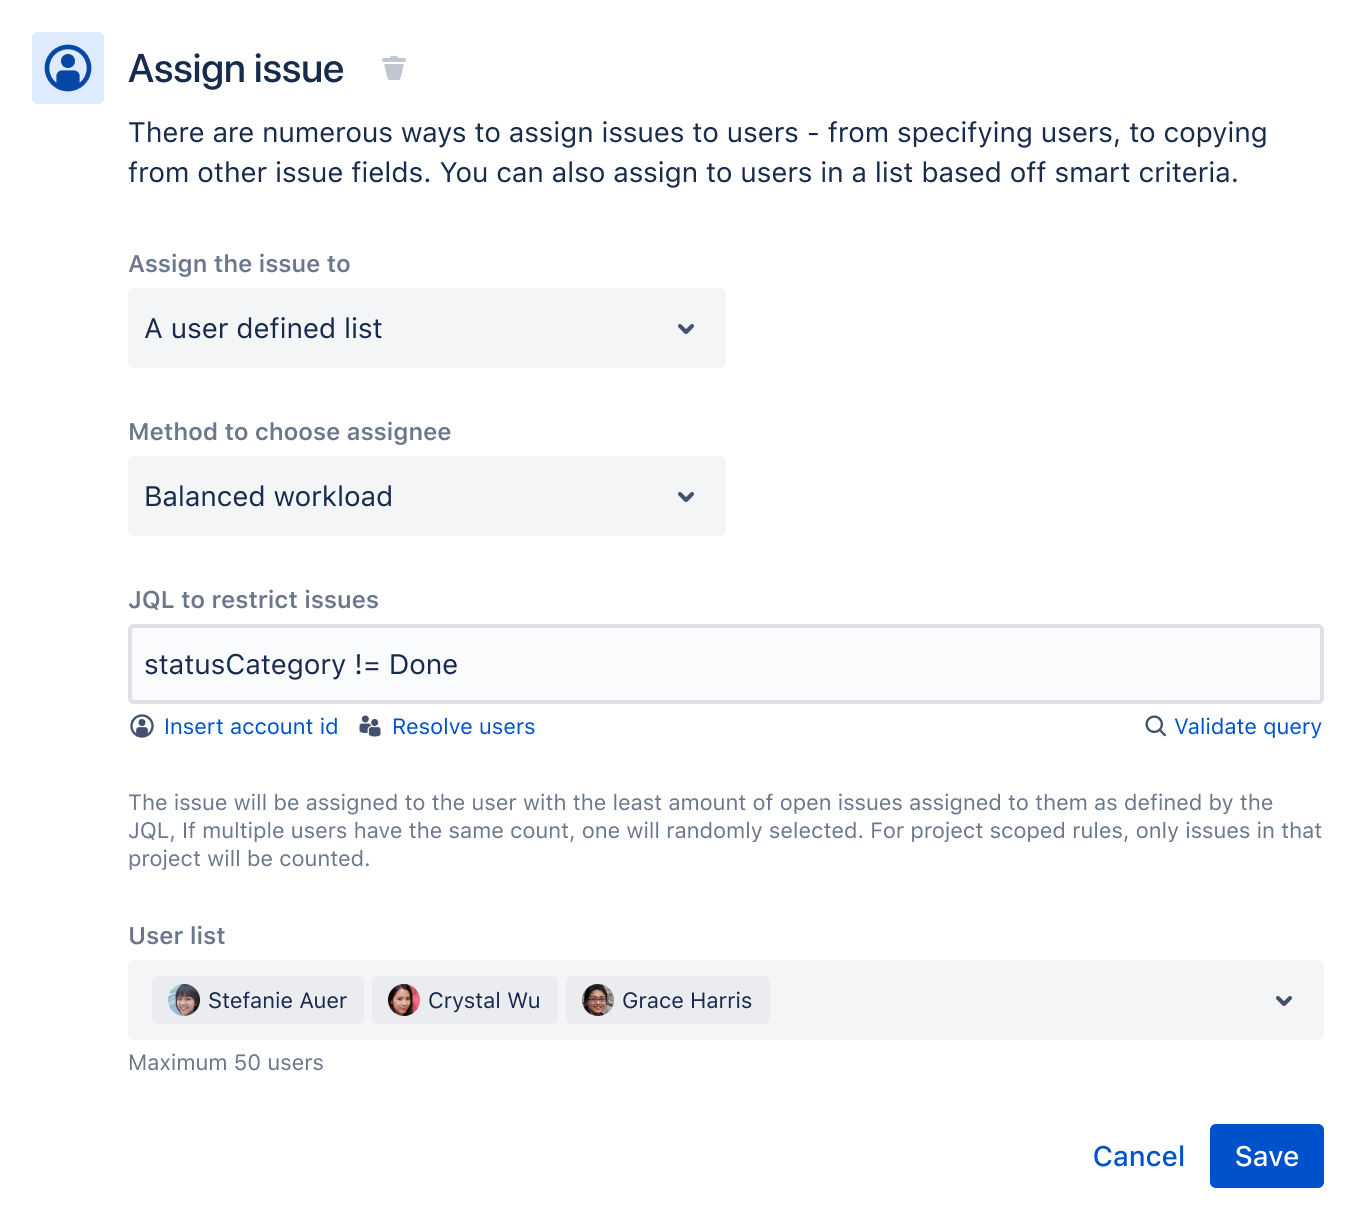 Setting up the Assign issue action to assign an issue to a user in a defined list.